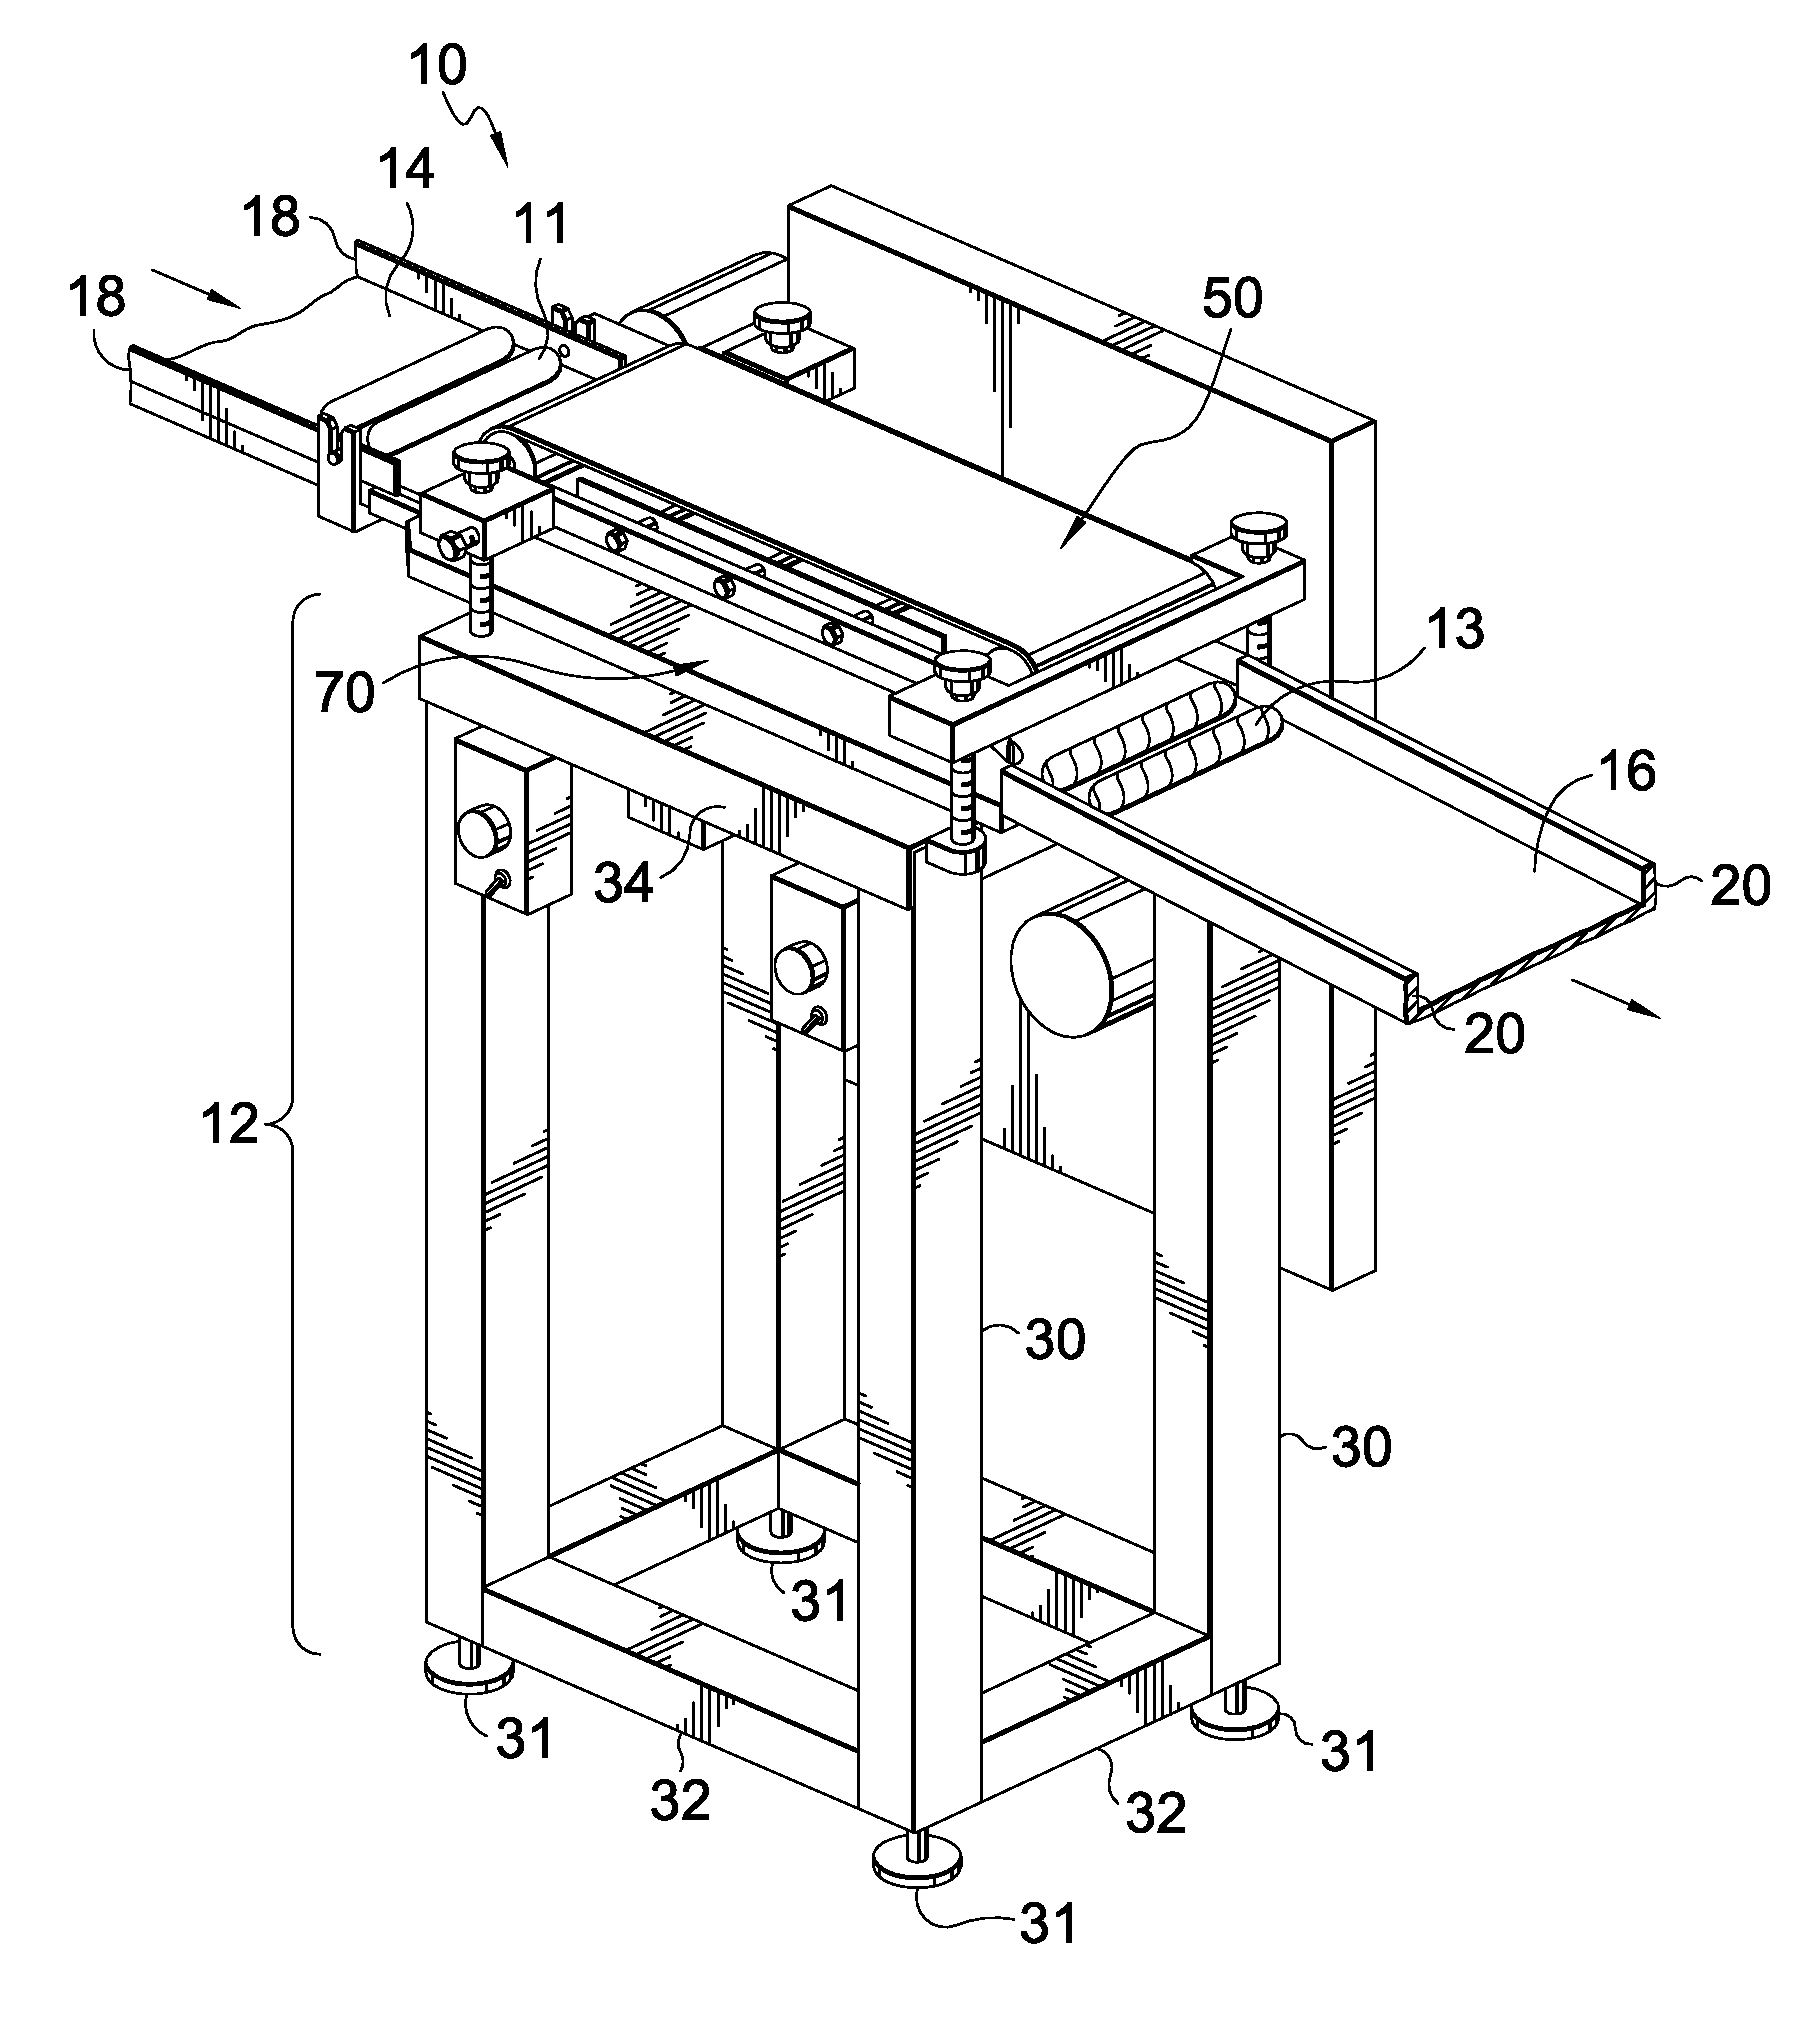 Device for making a spiral incision on a meat product